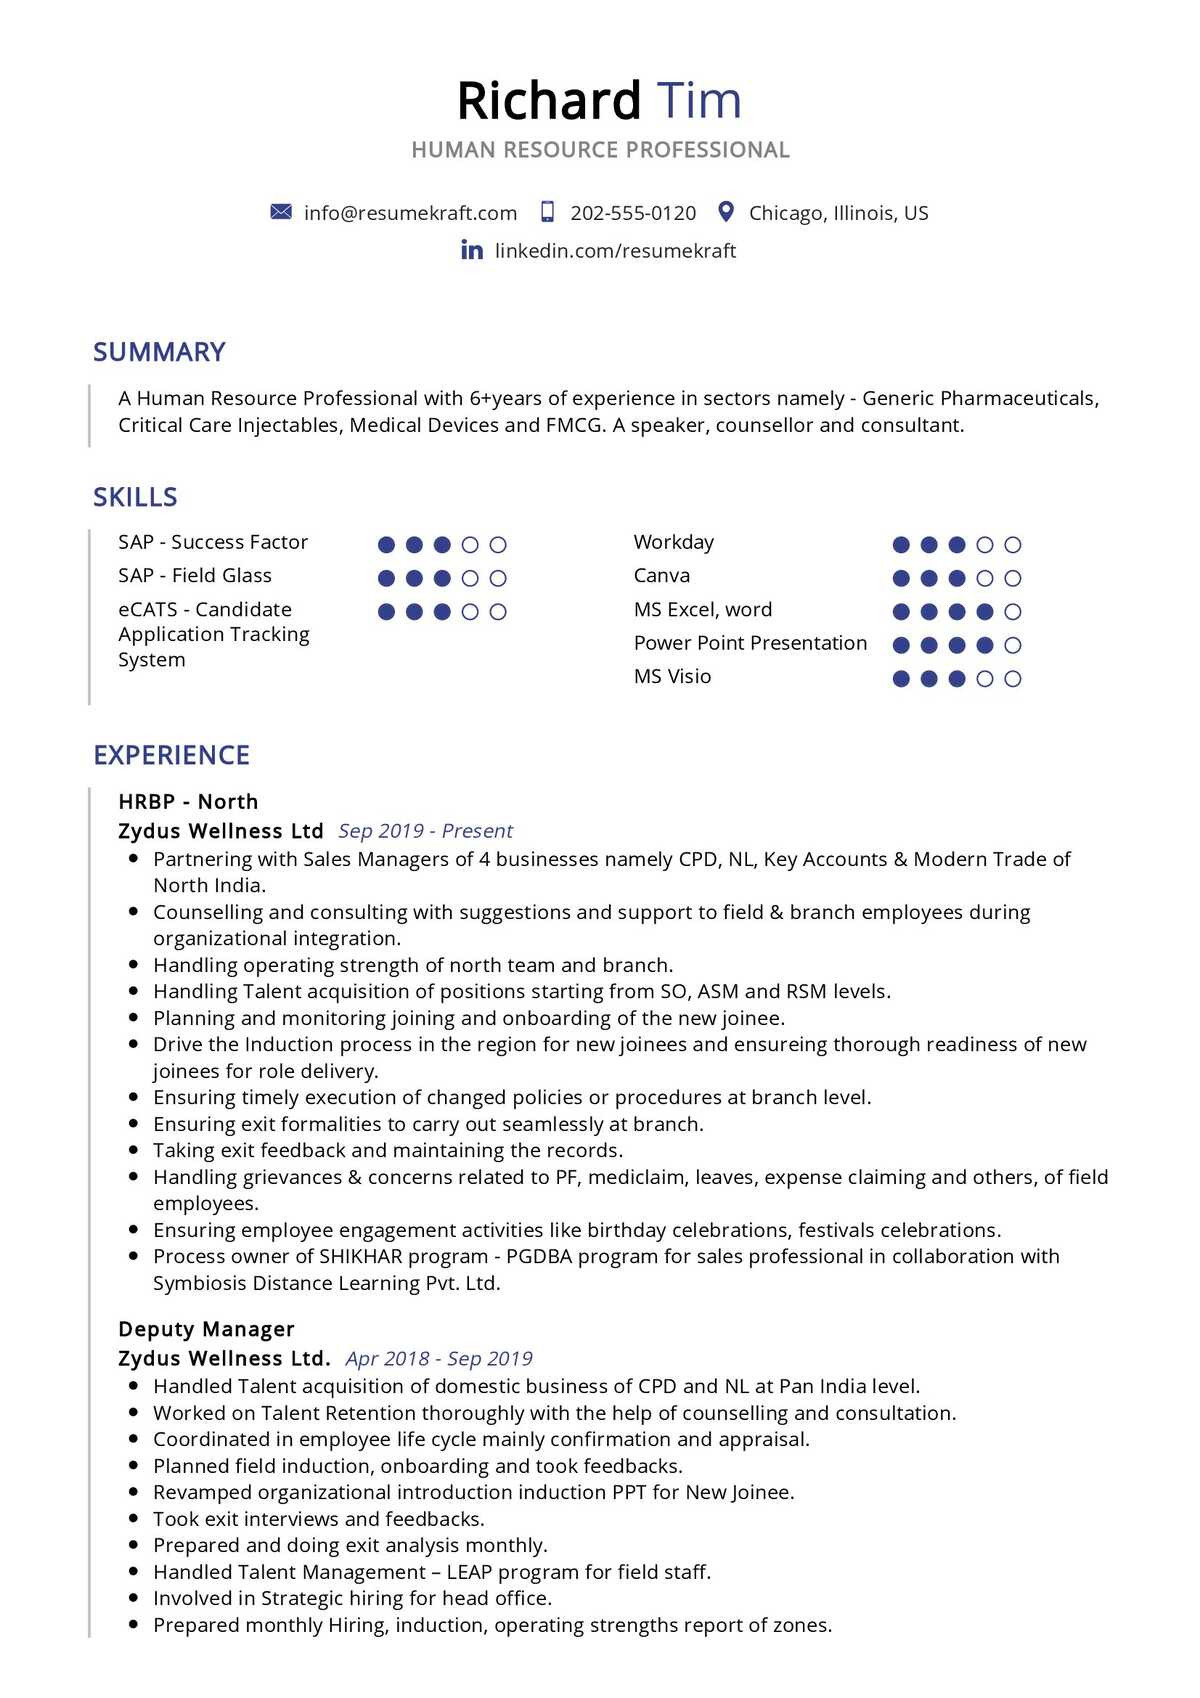 Sample Hr Resume with Union Experience Human Resources Professional Resume Sample 2022 Writing Tips …